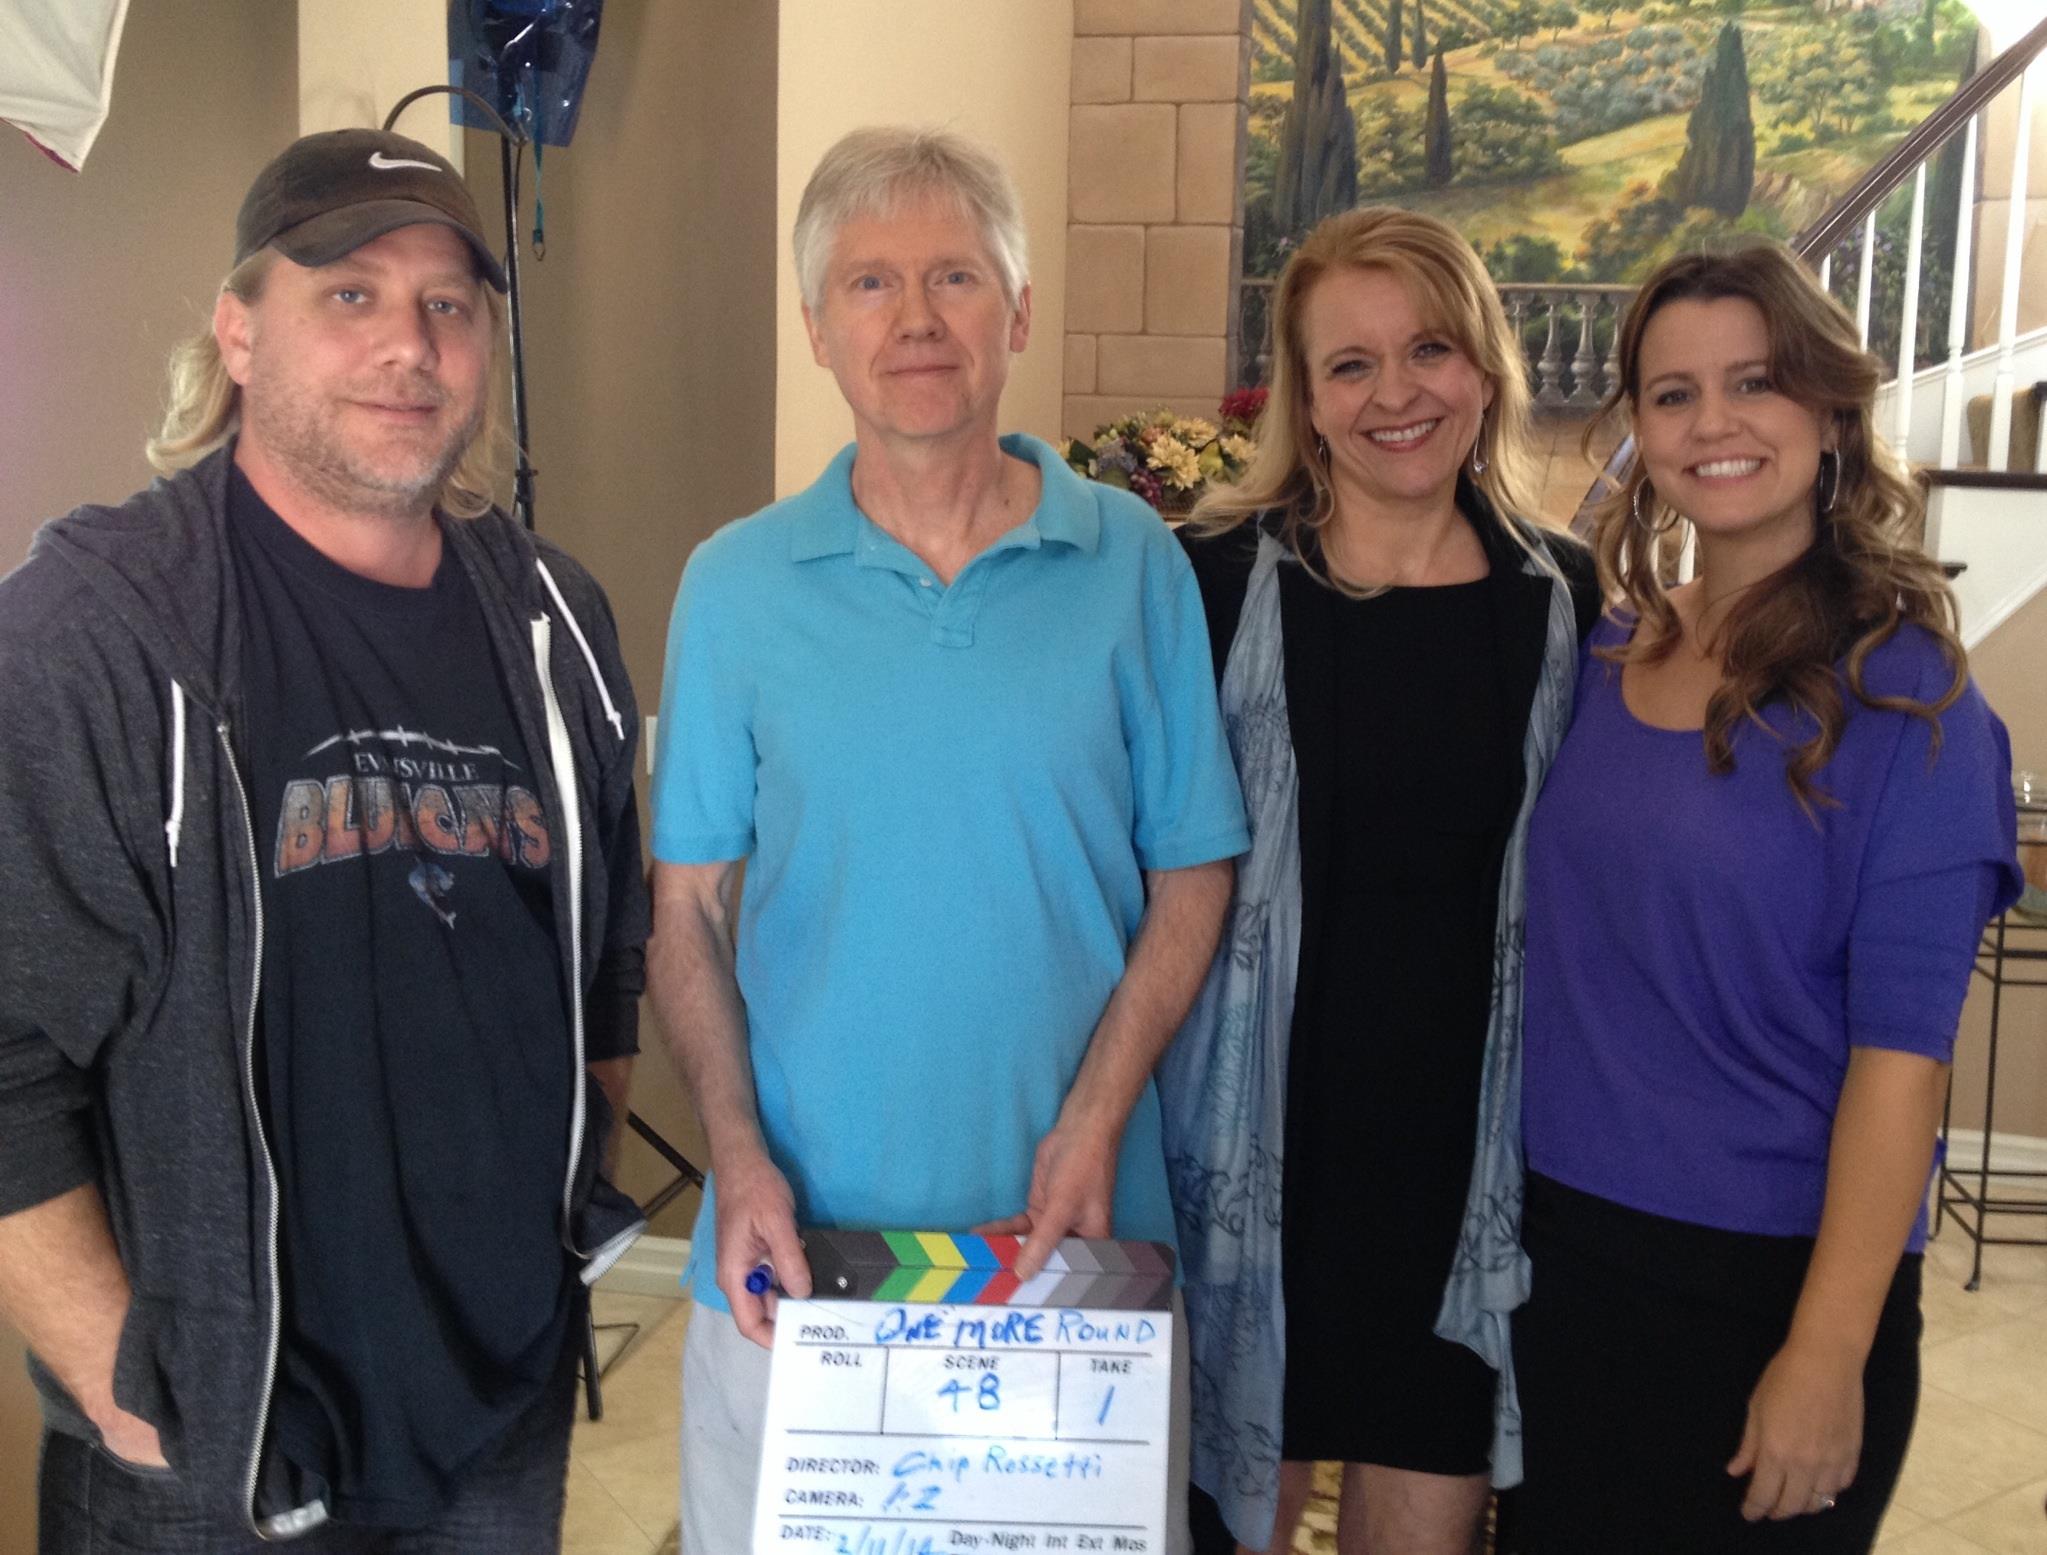 On Set of One More Round with Chip Rossetti, Joan Luebbert, and Mindy Thomas.